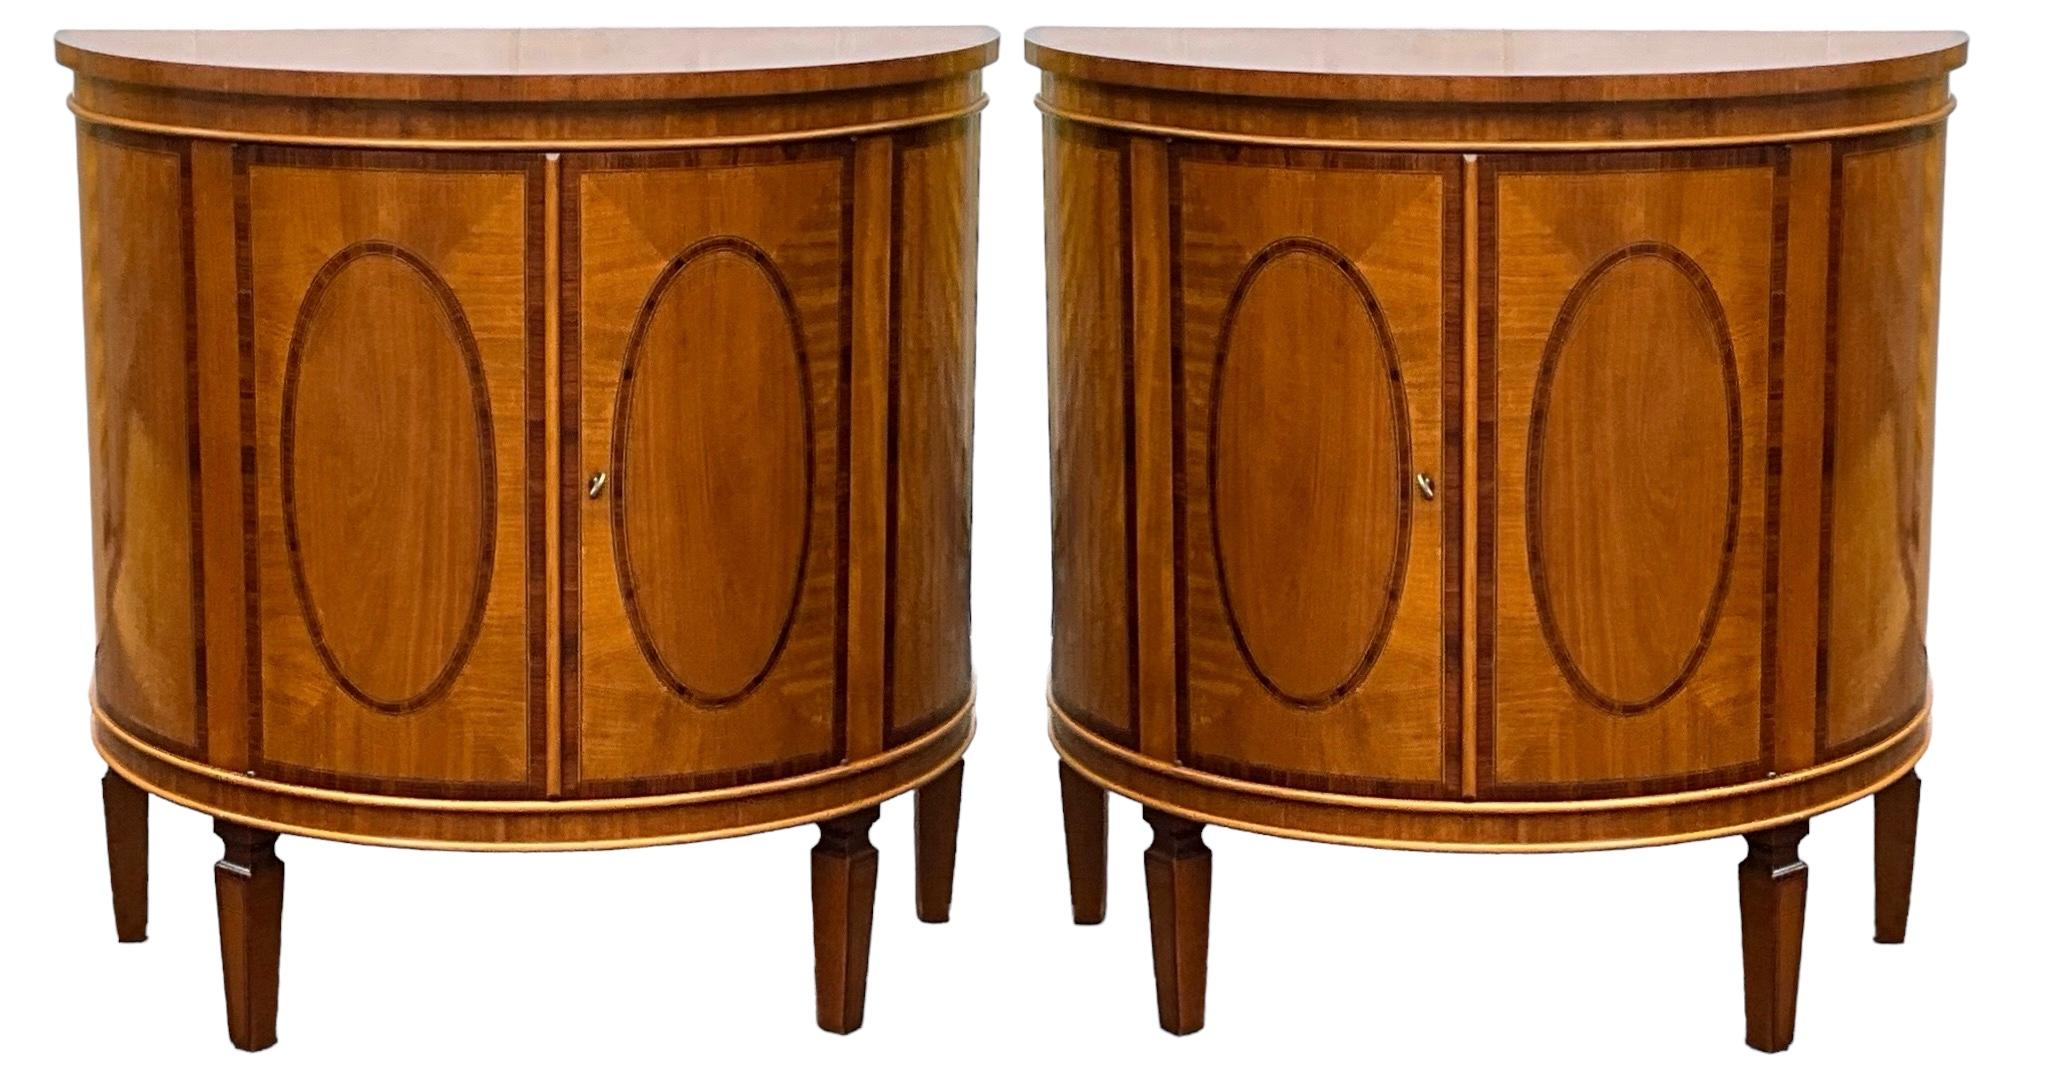 Italian Banded & Inlaid Satinwood Demilune Cabinets Att. Decorative Crafts -Pair For Sale 2